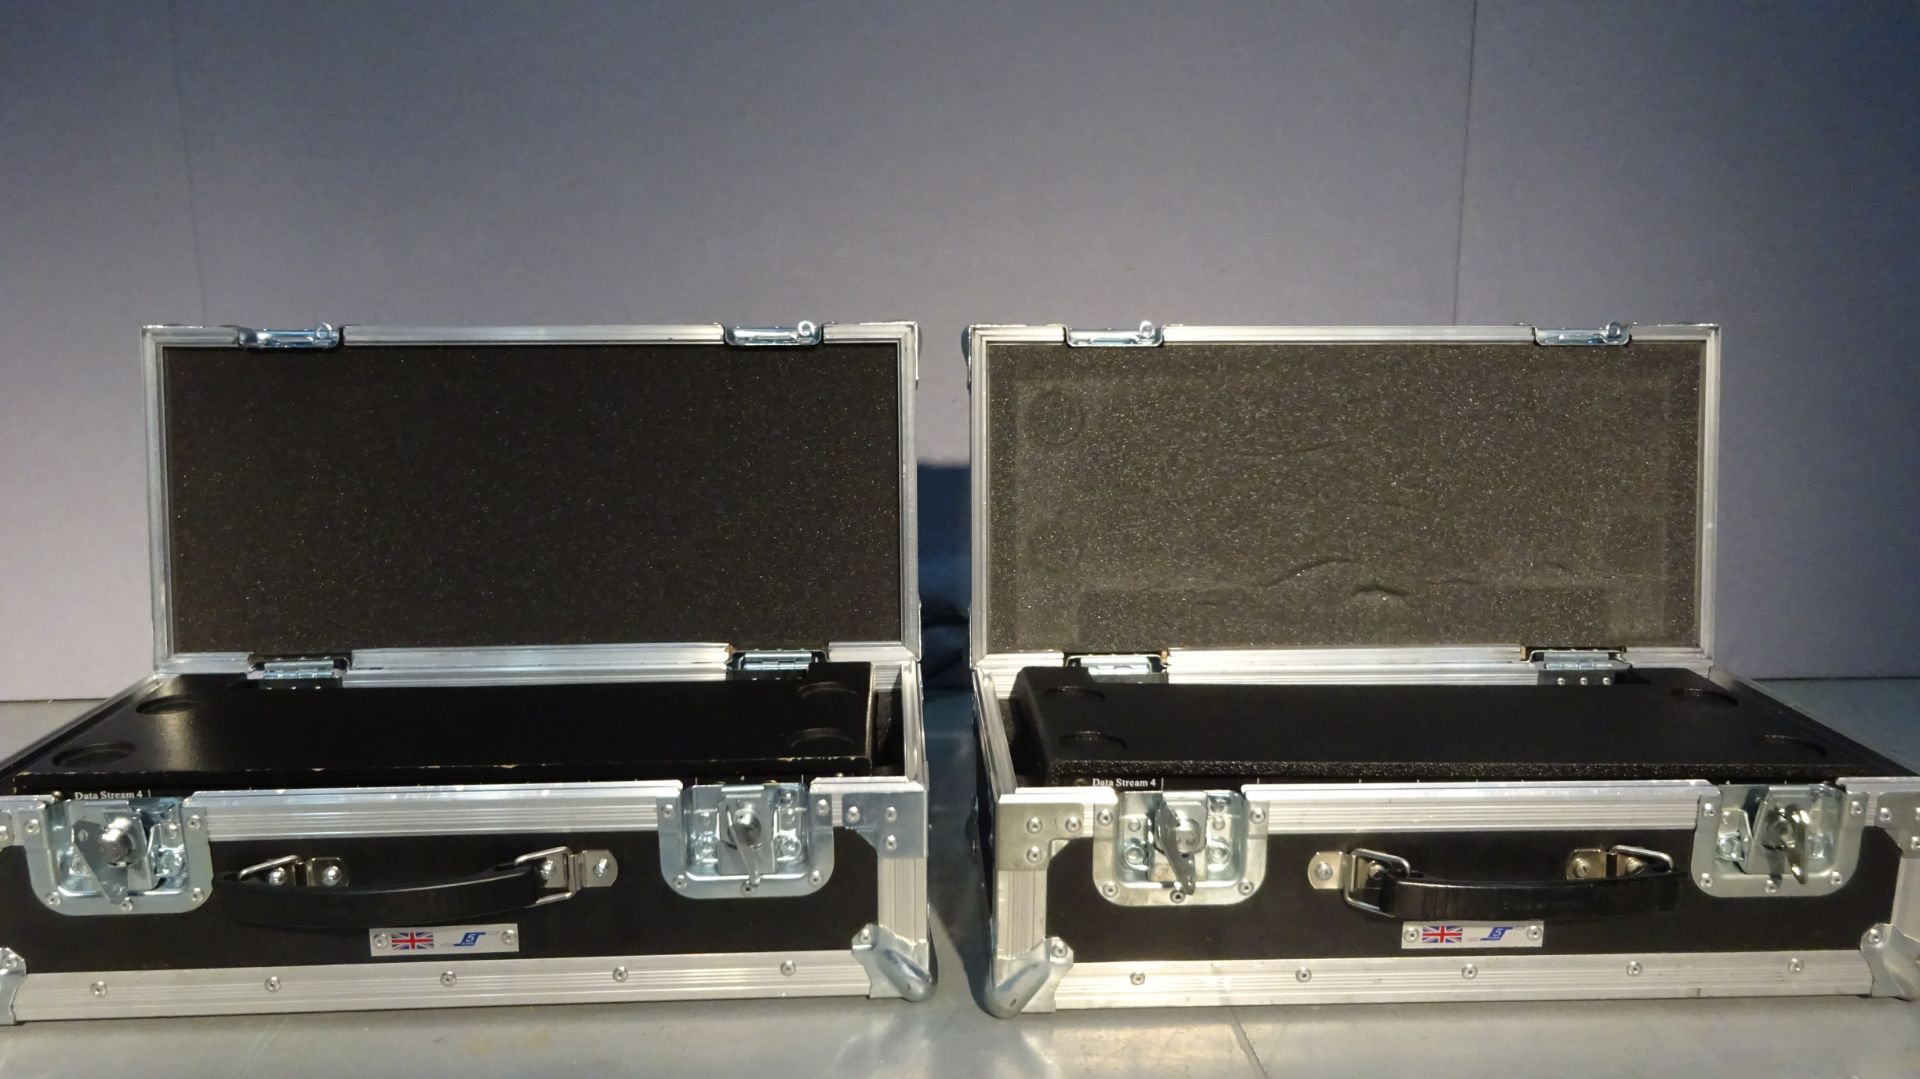 2 x Chauvet DMX Buffer Data Stream 4 1 in 4 out 3pin or 5pin c/w mains lead & Flight Case - Image 6 of 8